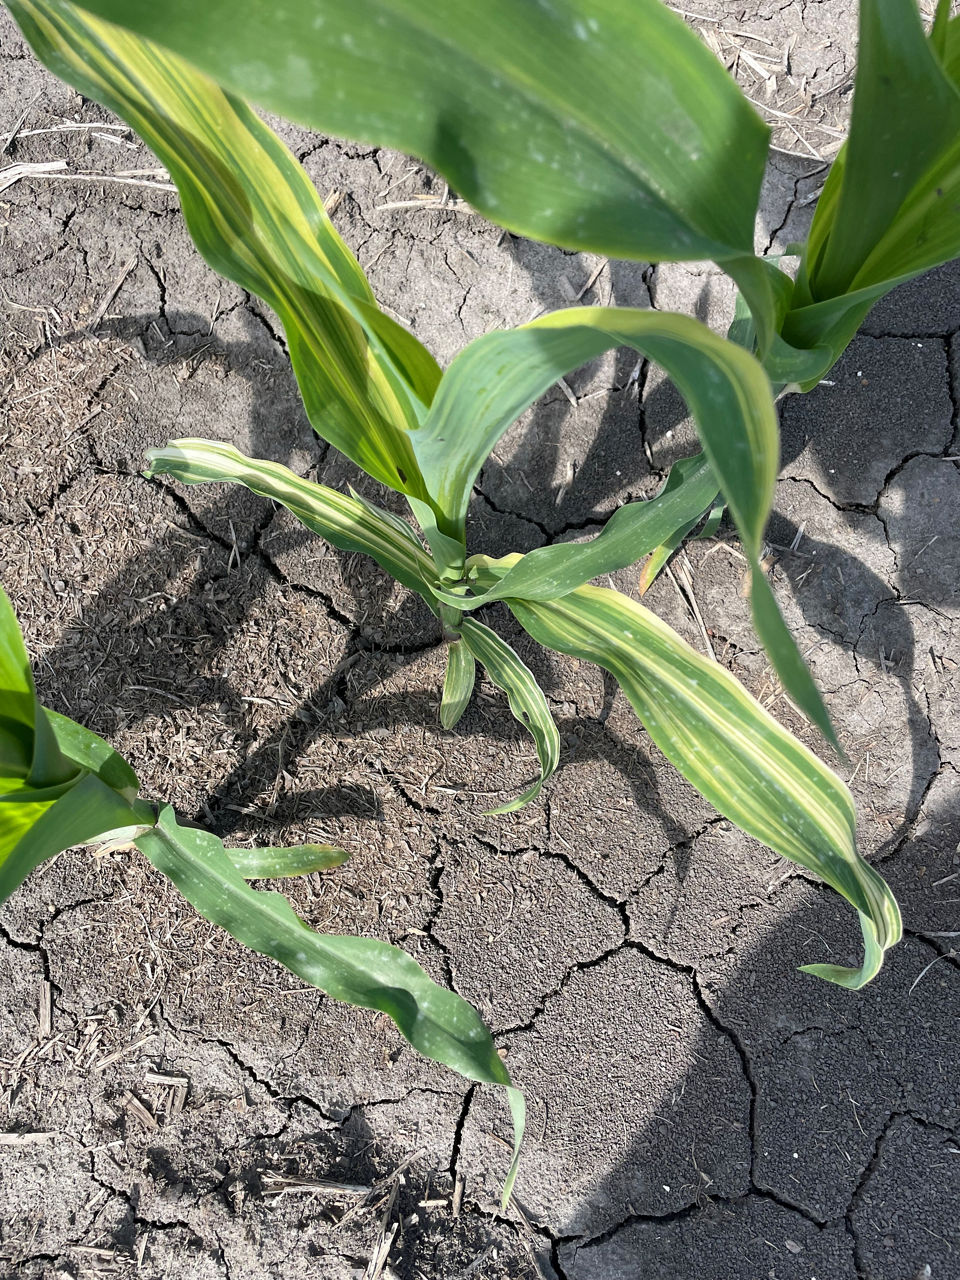 Characteristic yellow striping resulting from sulfur deficiency. 